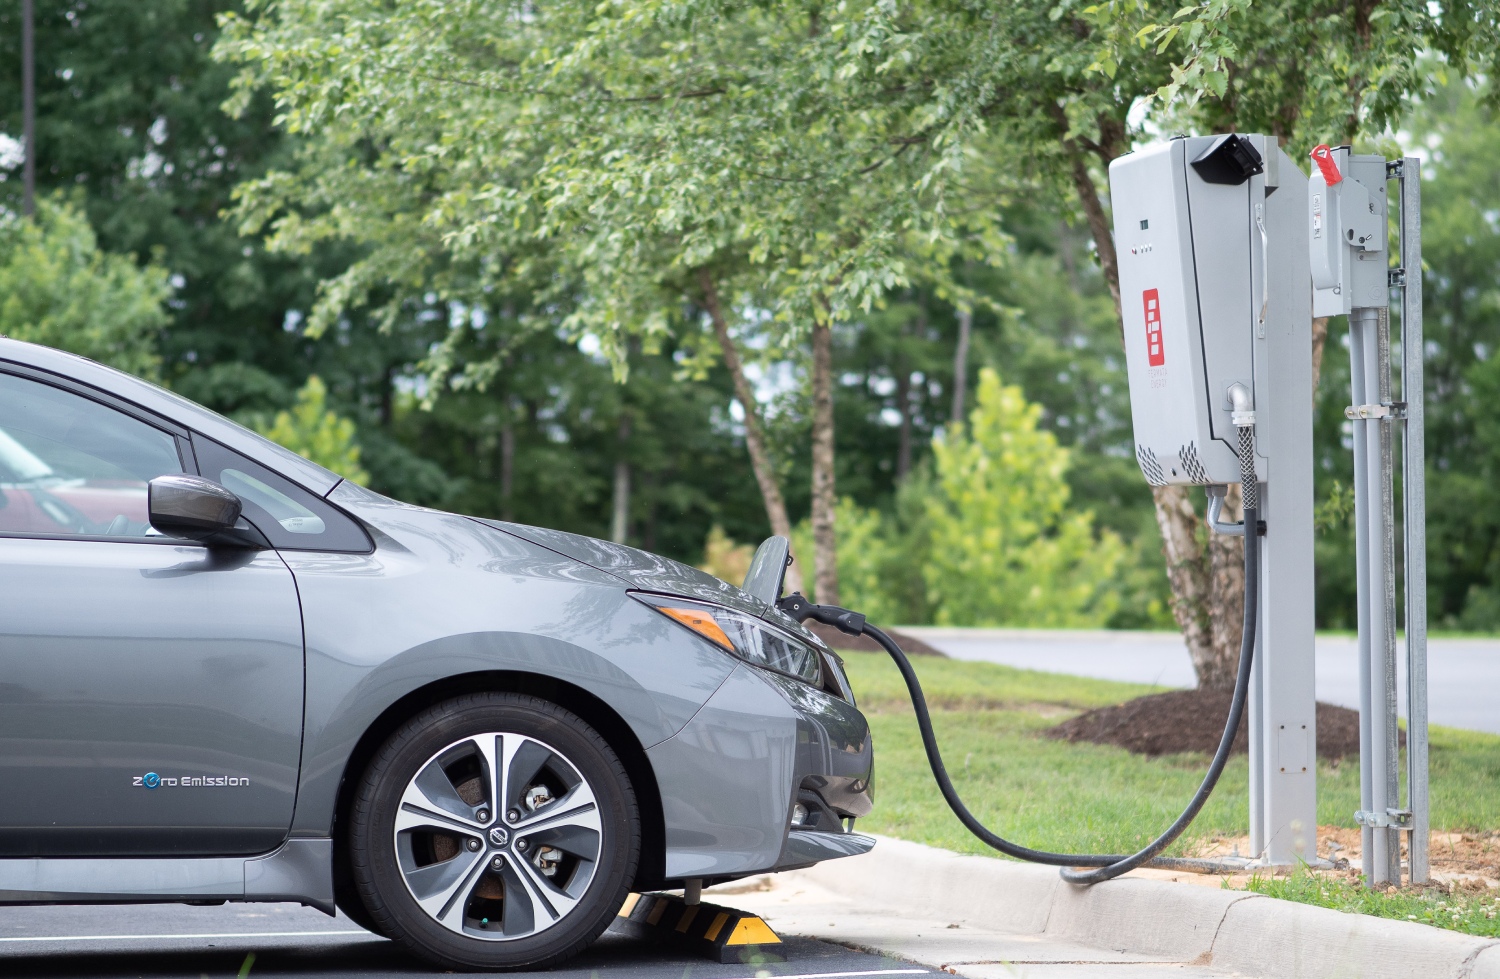 The Nissan Leaf bidirectional charging helps reduce ownership costs